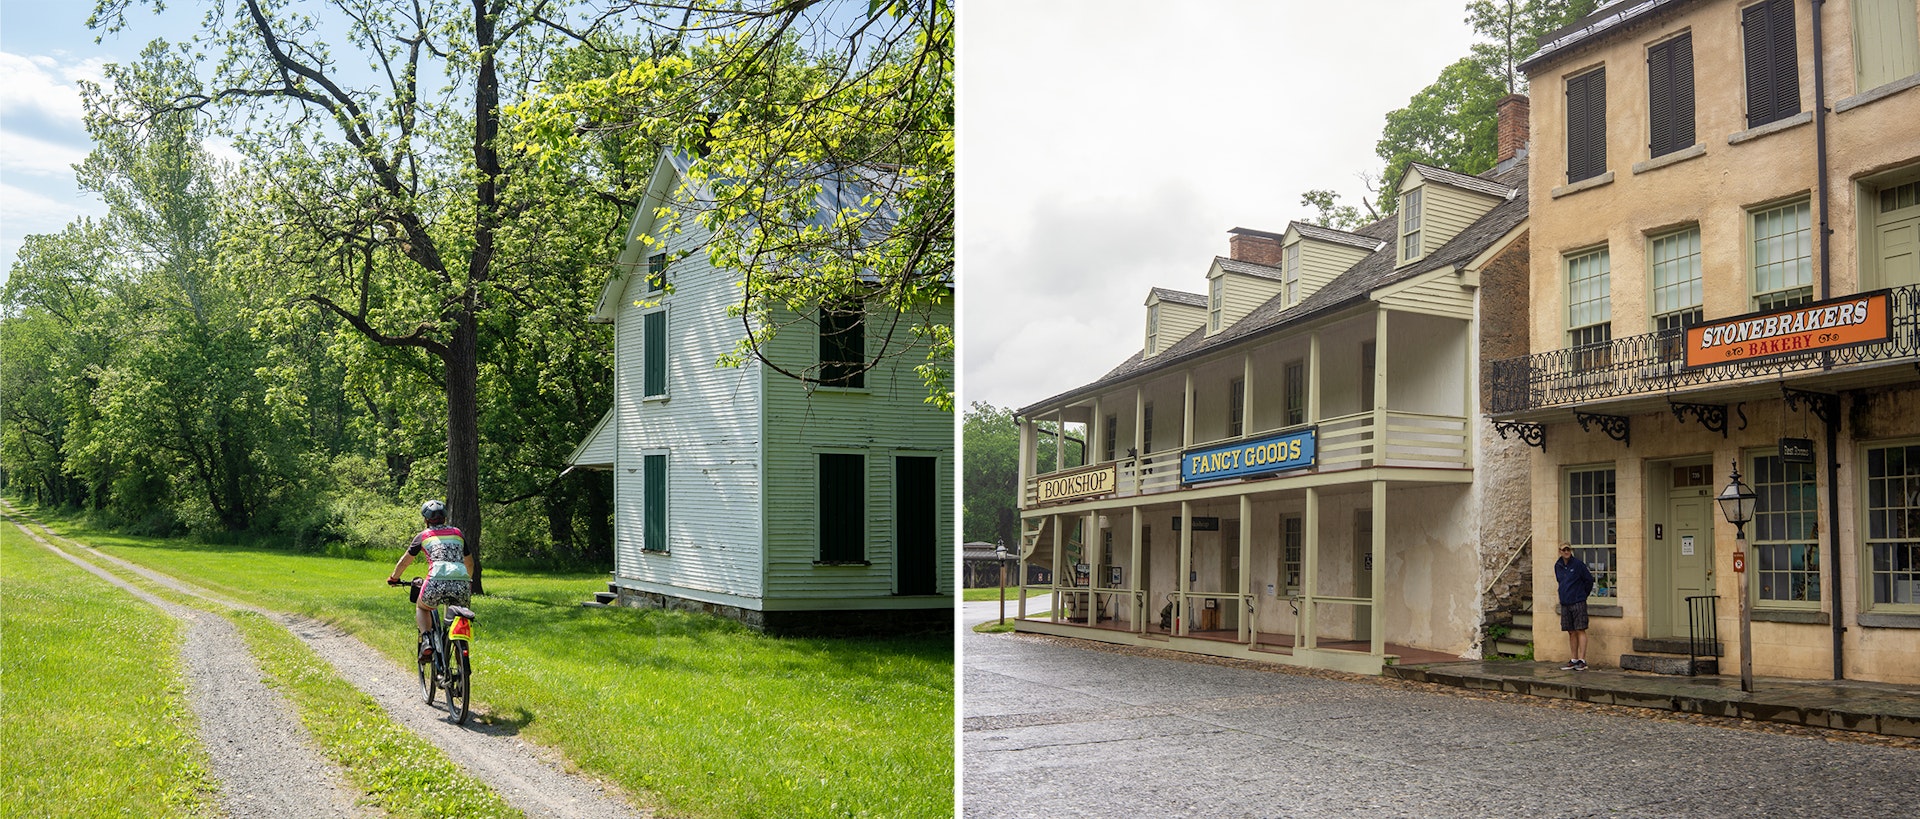 LEFT: Cyclist riding along towpath; RIGHT: Line of shops in Harpers Ferry, West Virginia